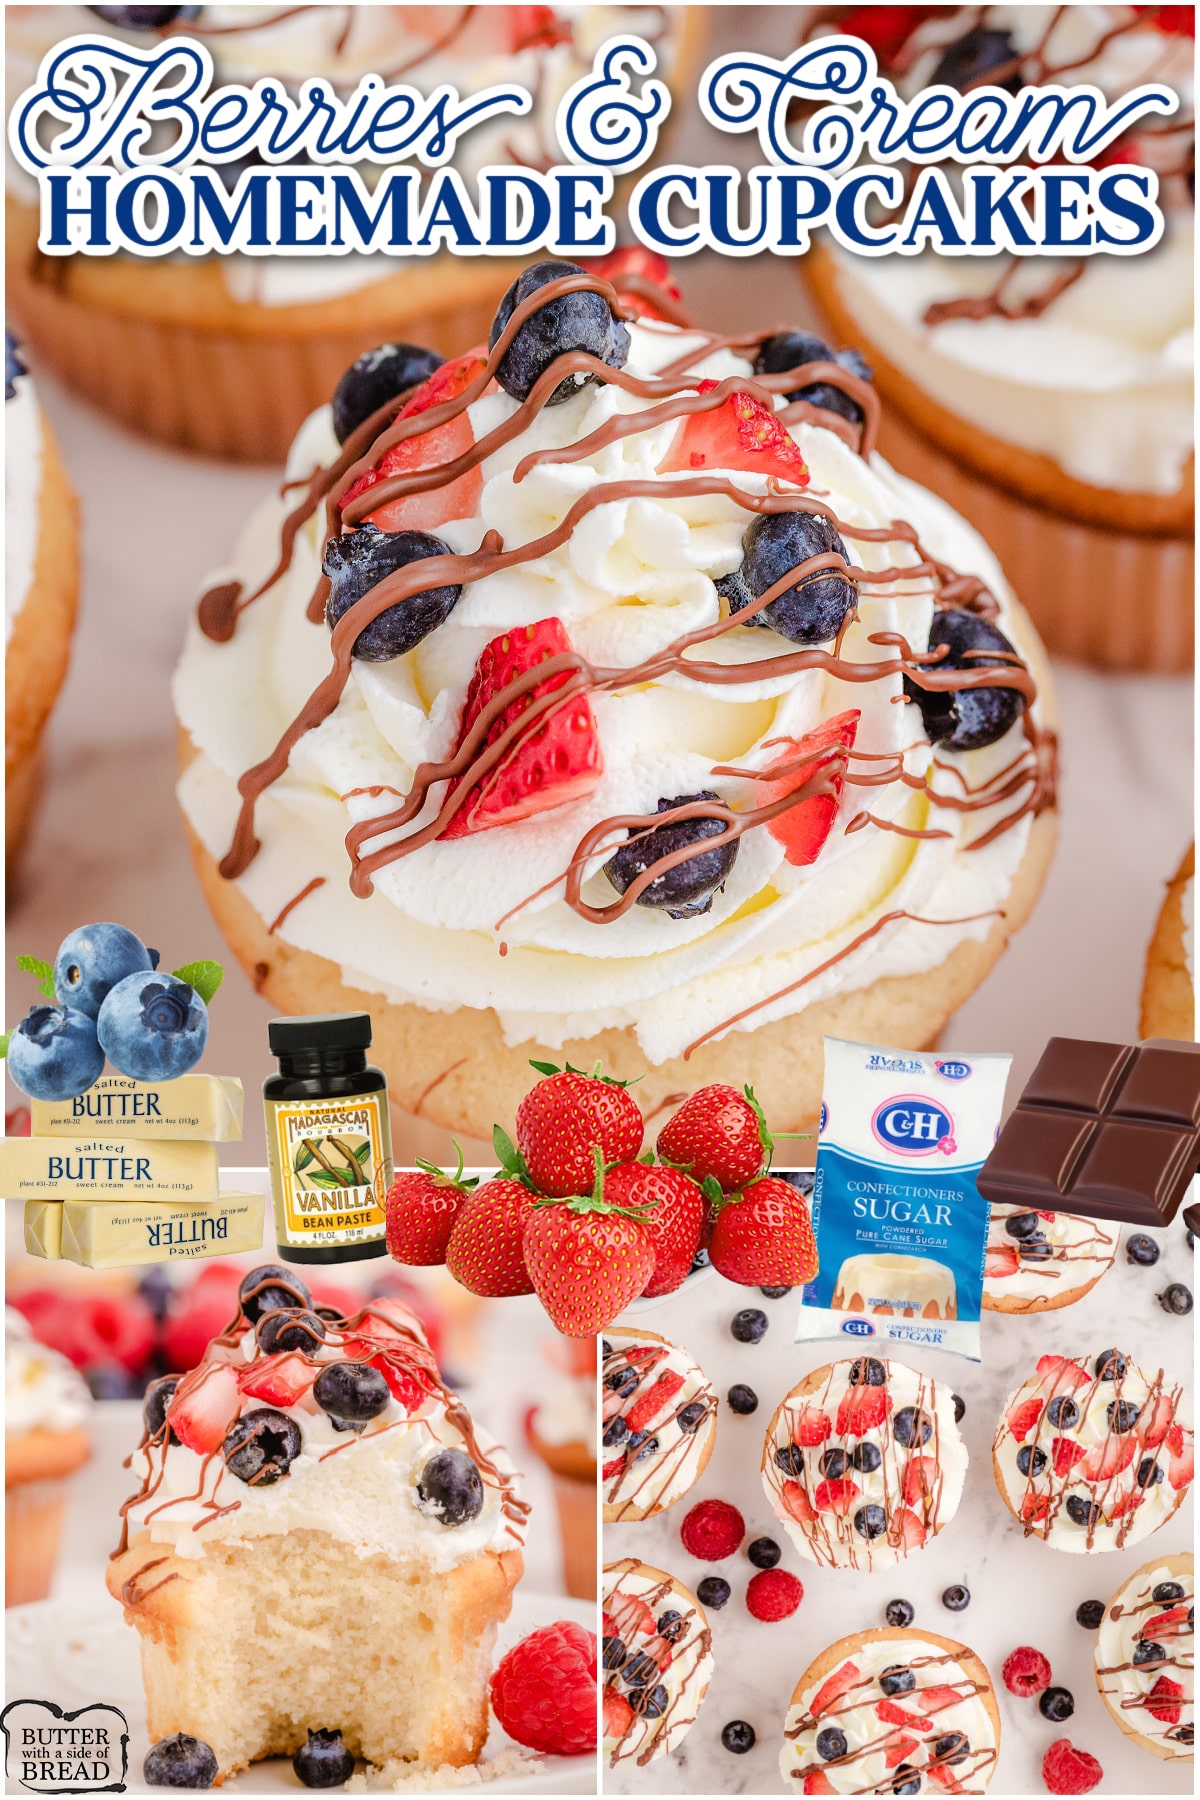 Berries and Cream Cupcakes are velvety vanilla cupcakes topped with sweet almond whipped cream & fresh berries! Homemade mixed berry cupcakes everyone enjoys!